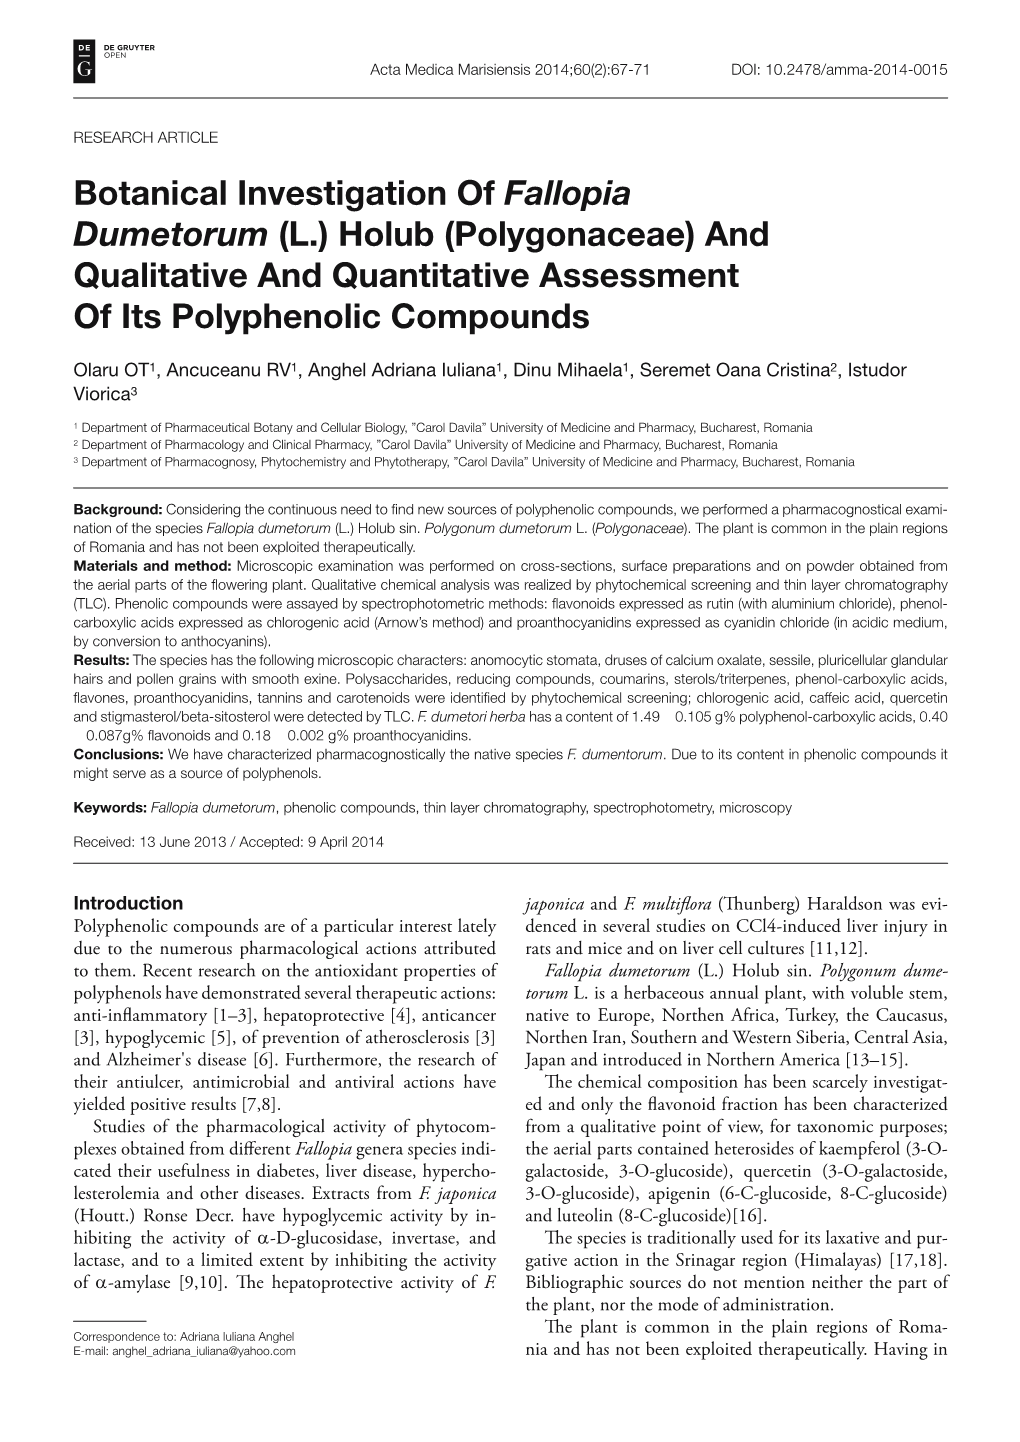 Polygonaceae) and Qualitative and Quantitative Assessment of Its Polyphenolic Compounds